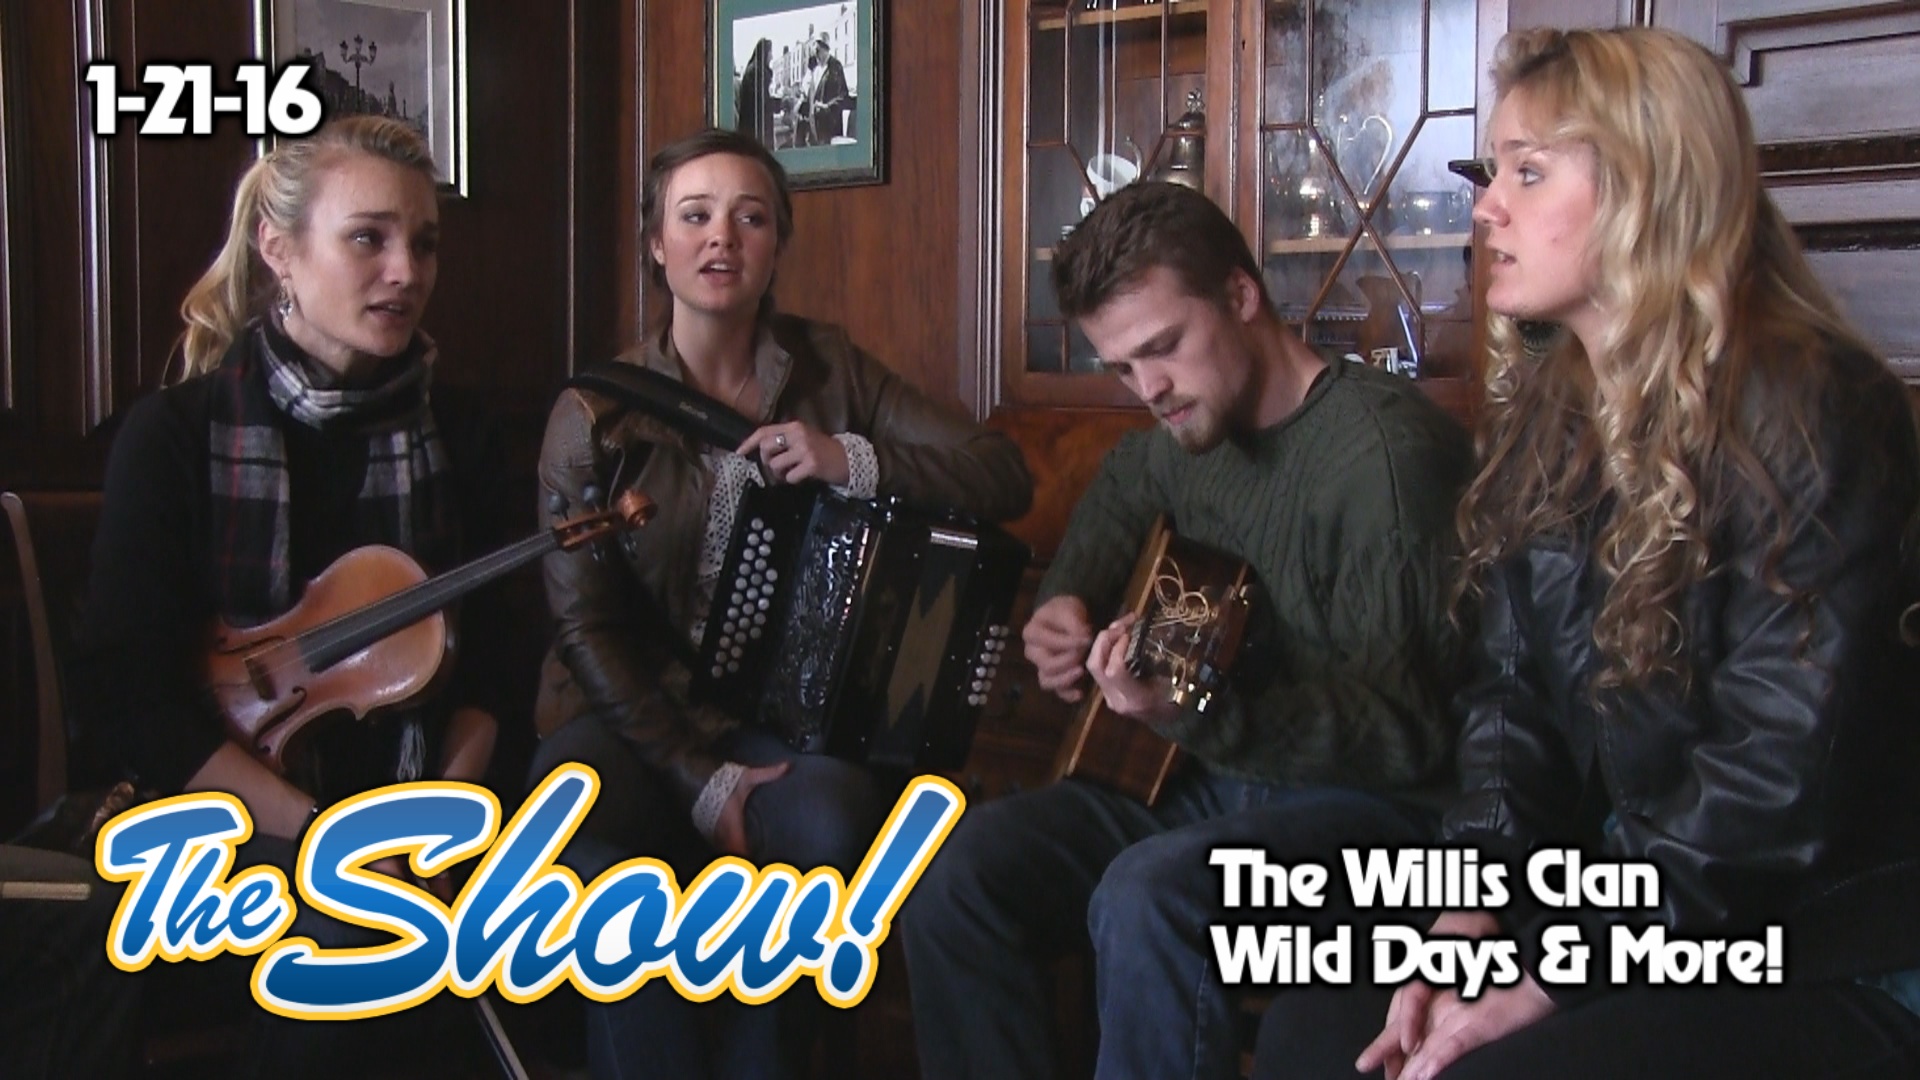 Attractions – The Show – The Willis Clan; Wild Days at SeaWorld; latest news – Jan. 21, 2016